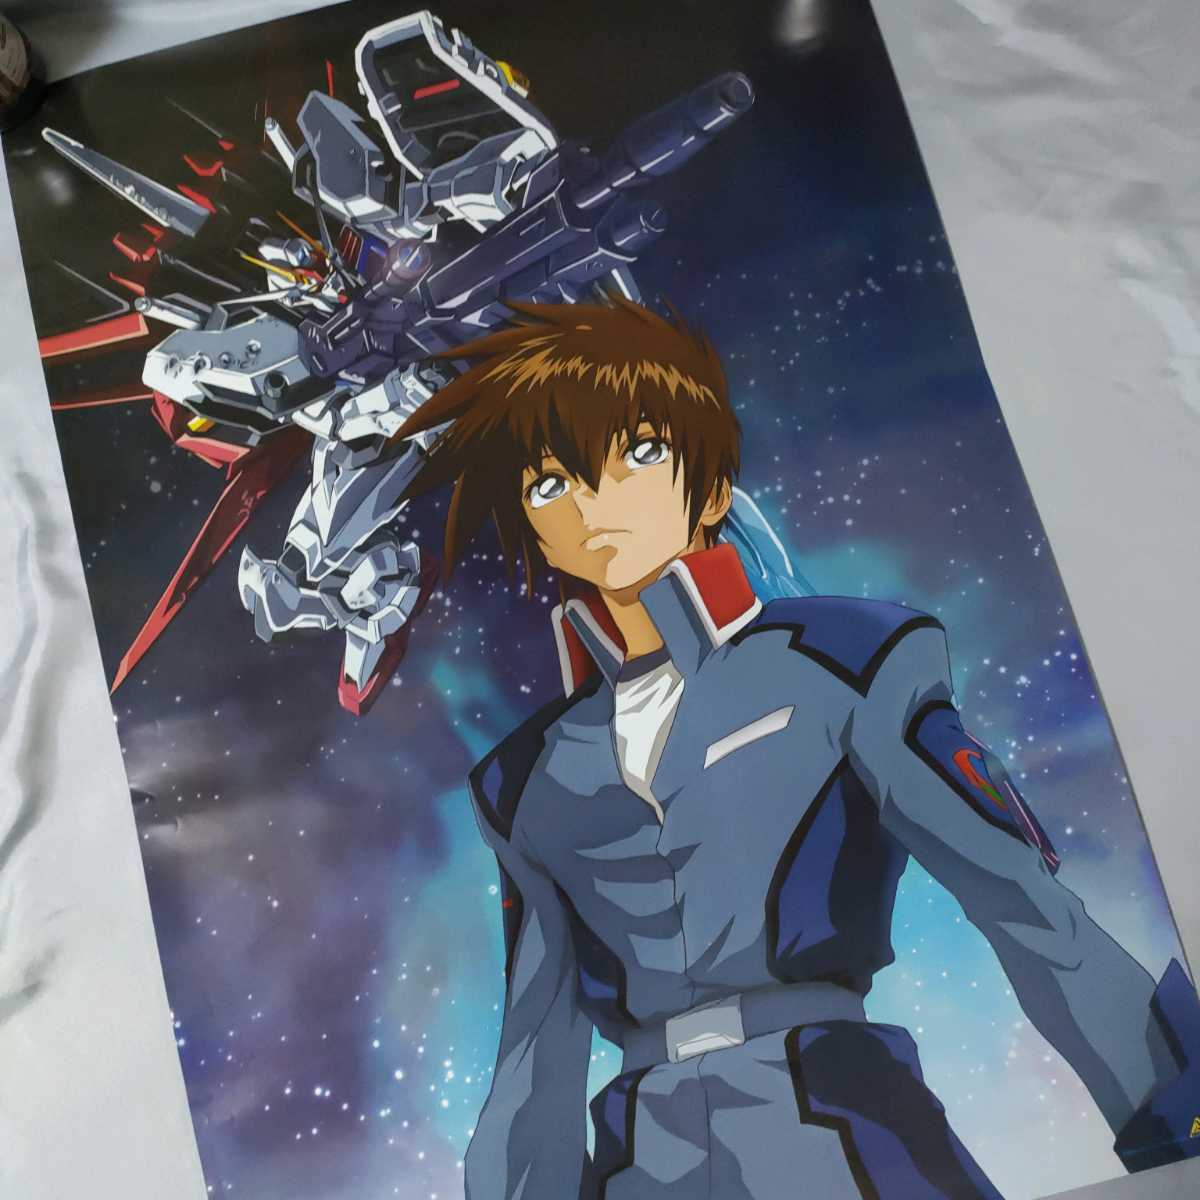  Mobile Suit Gundam SEED anime poster B2 size 